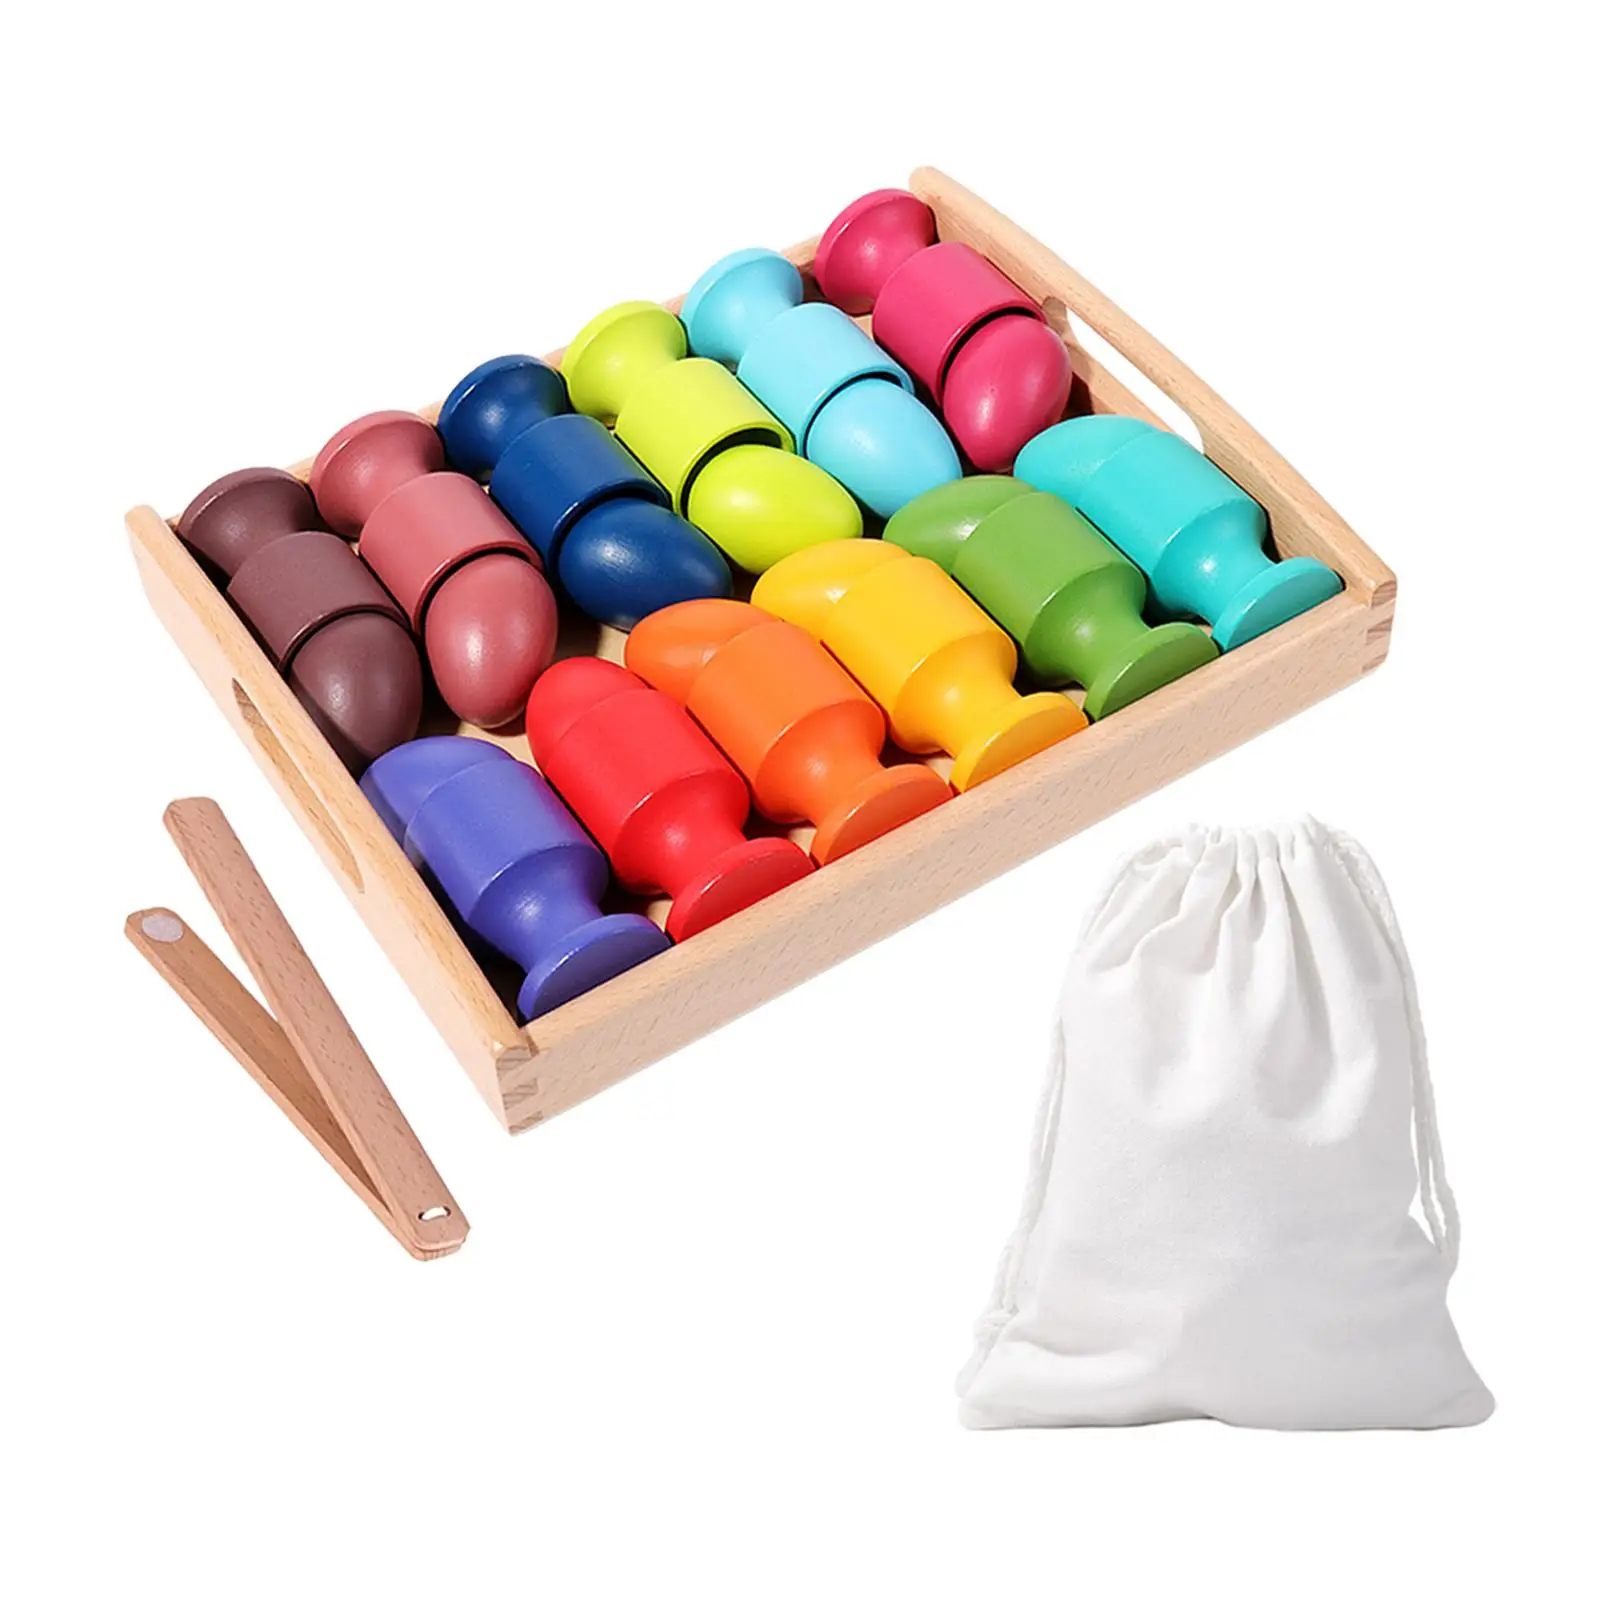 Wooden Color Sorting Toys Fine Motor Educational Toys Rainbow Egg Balls in Cups for Boys Girls Kids Children Baby Counting Toys